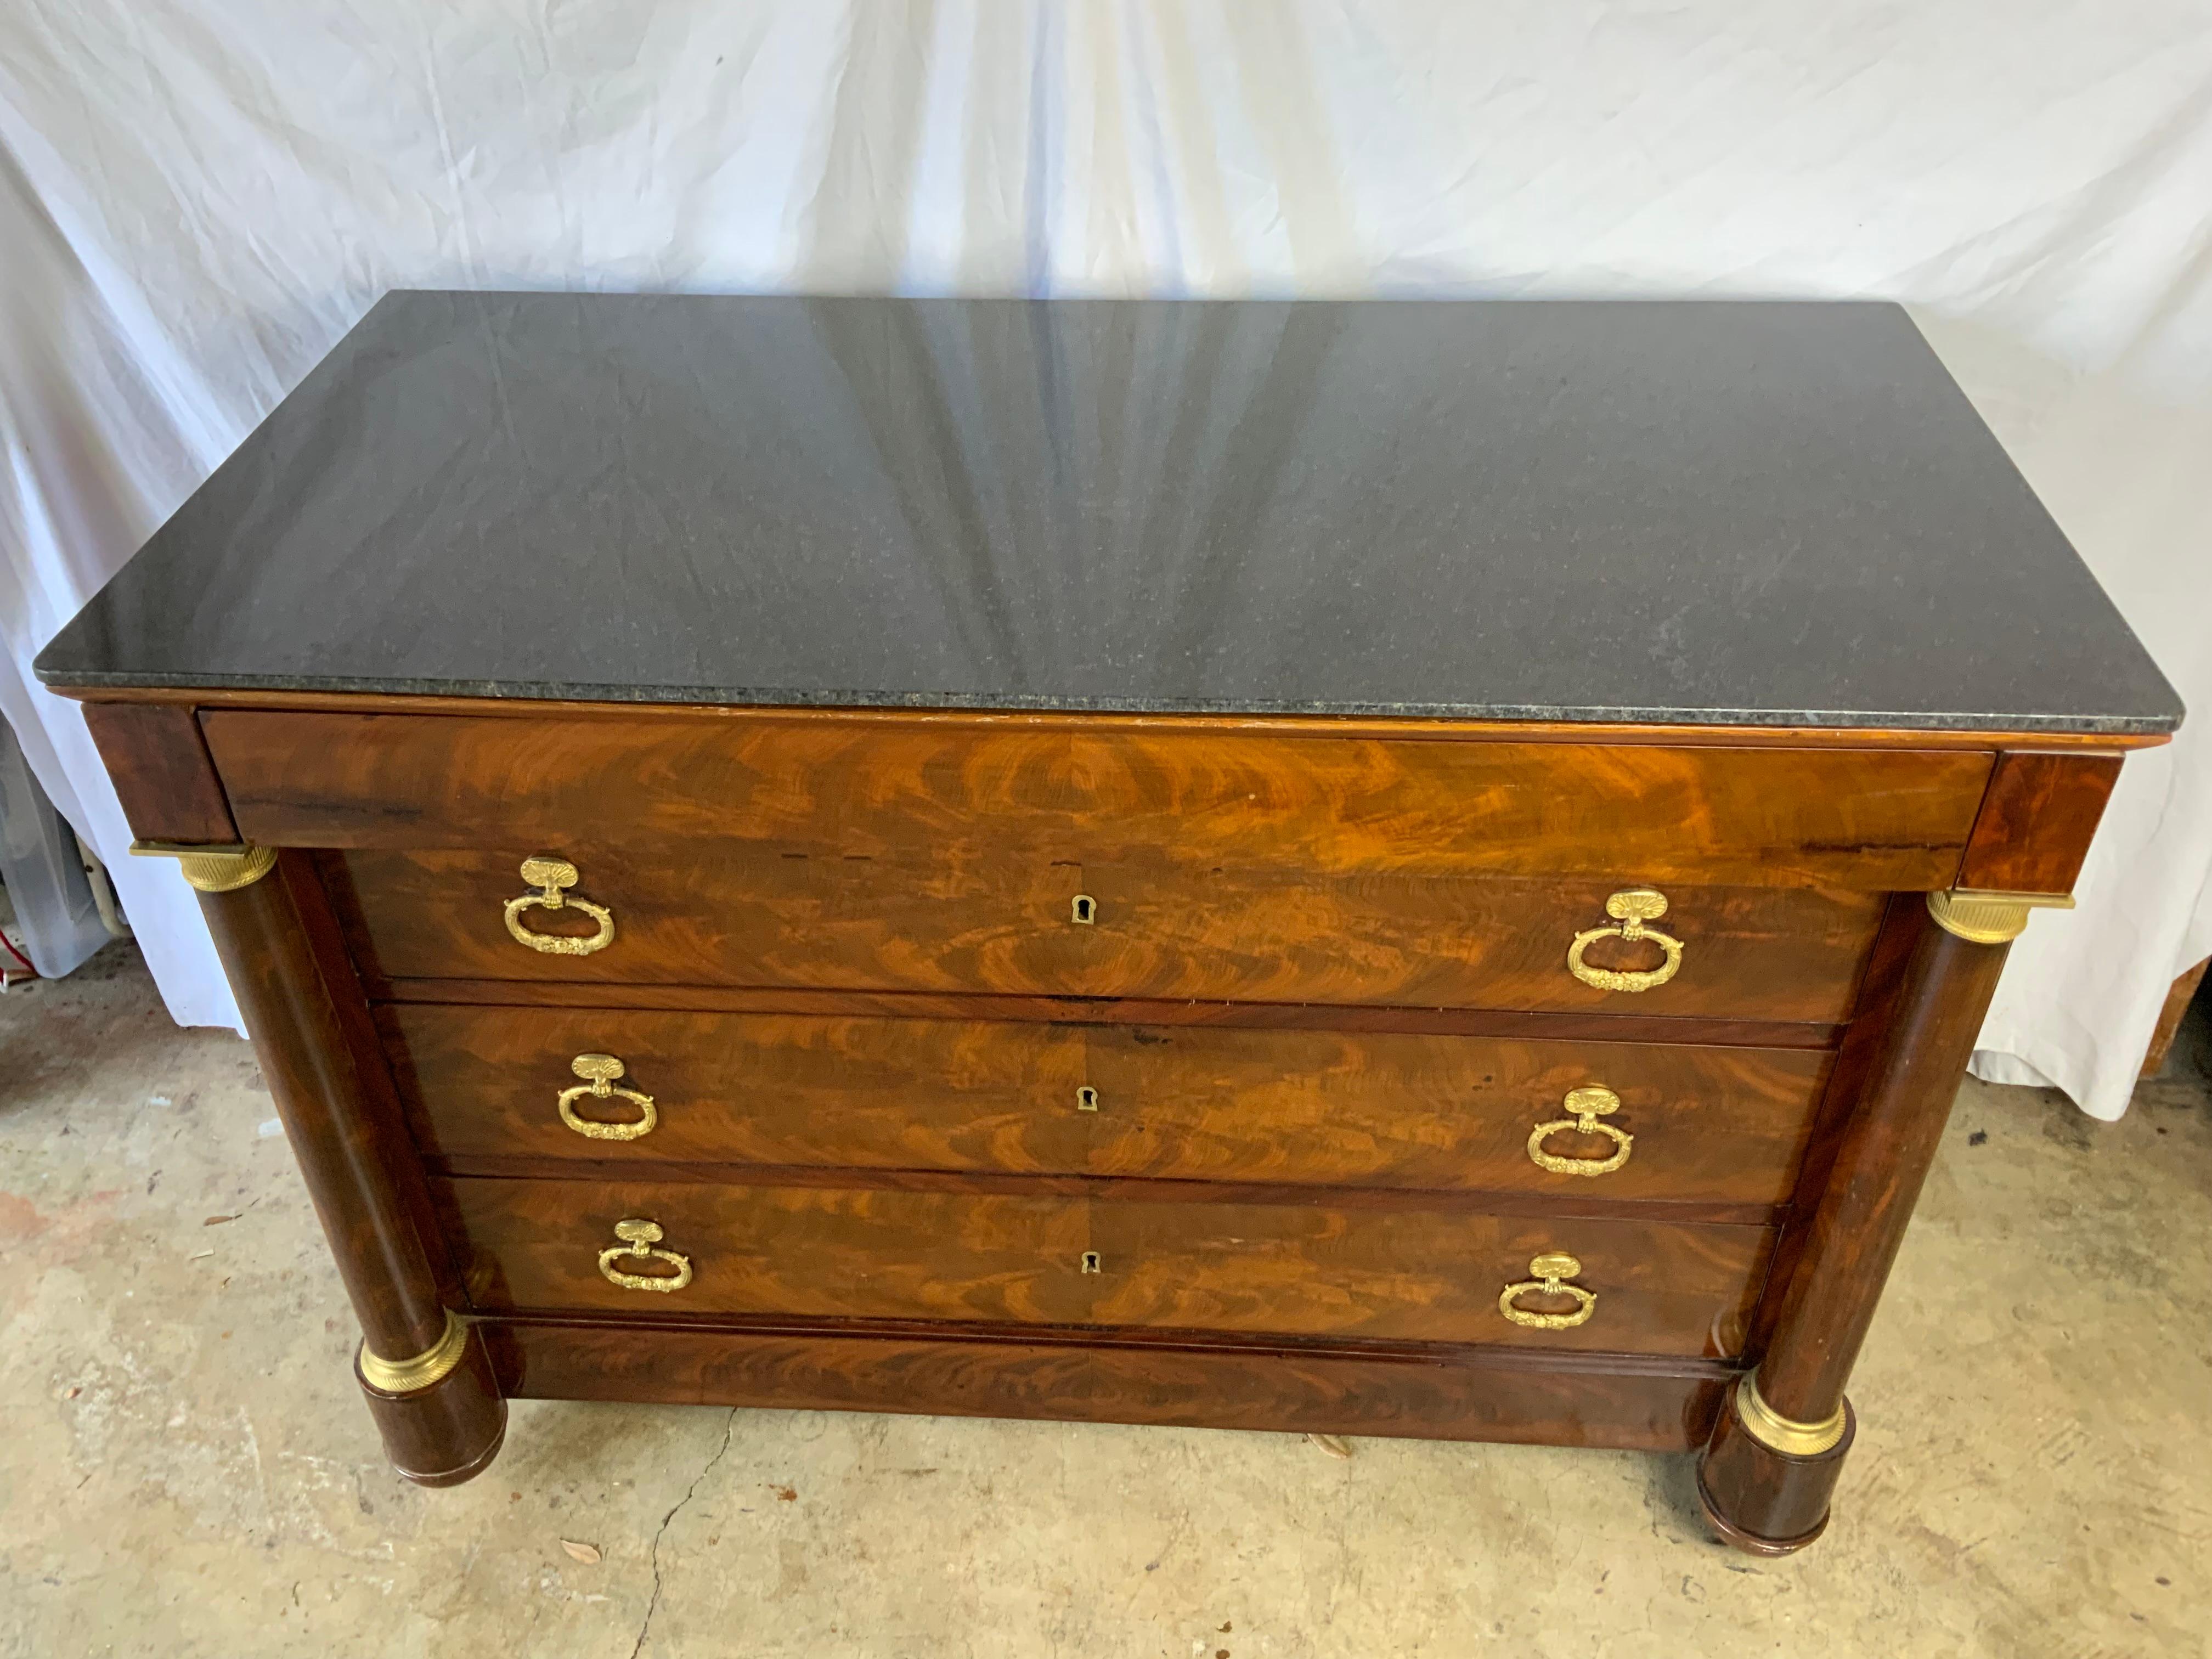 A very attractive French Empire Mahogany Commode.  Solid granite top over 4 drawers all with working locks and individual keys for each drawer.  Round Mahogany veneer columns with Ormolu trim.   Beautiful French polish older finish with a very nice